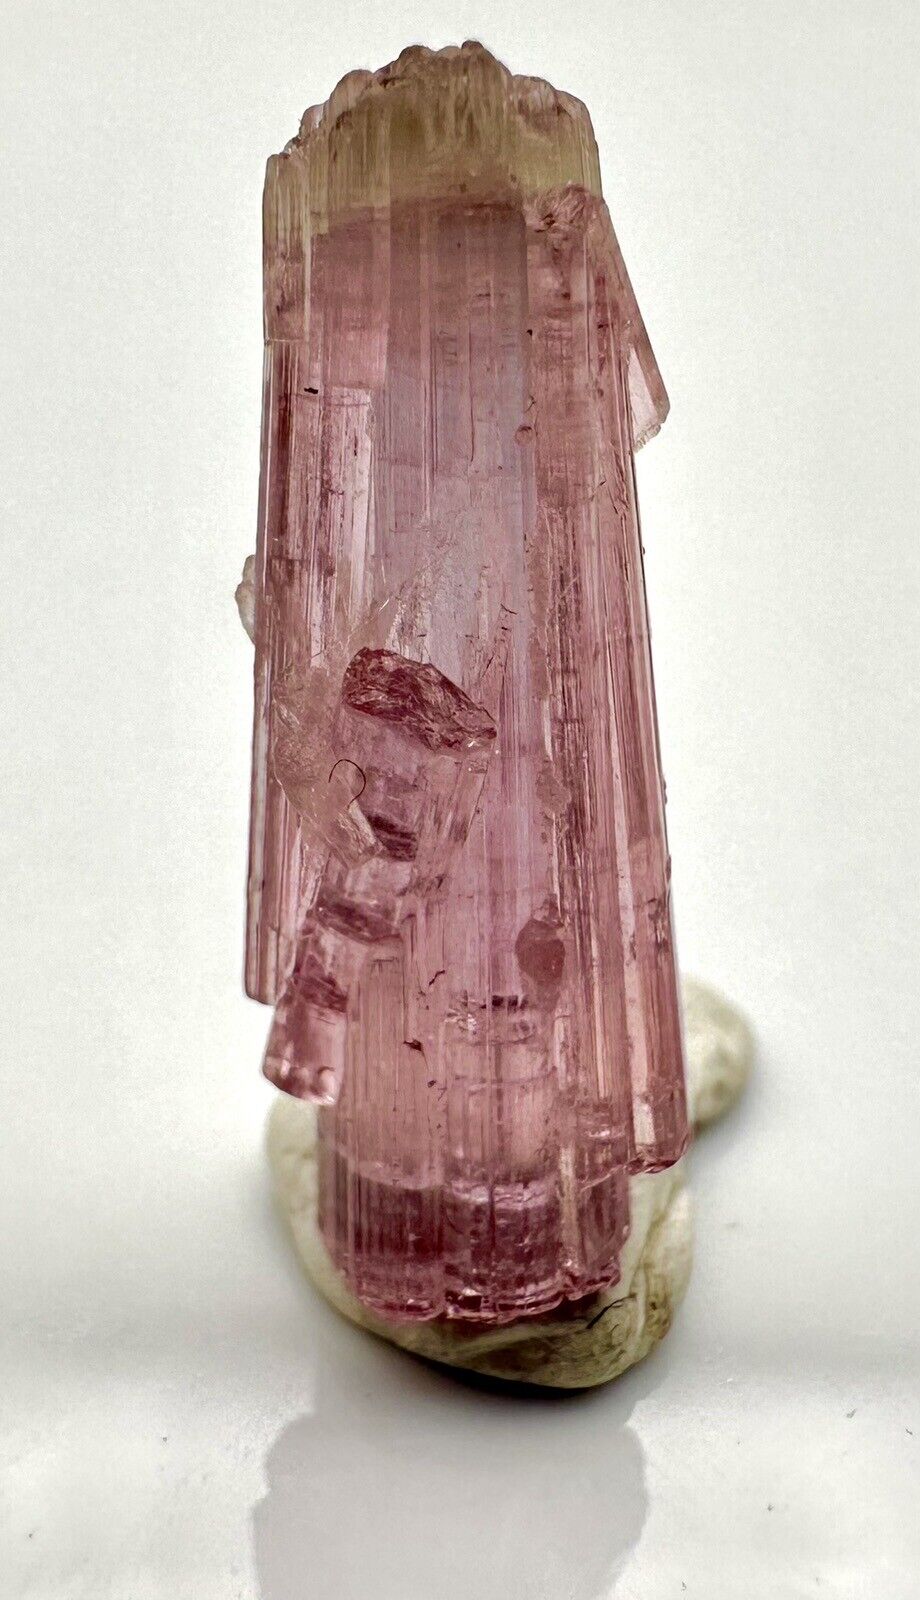 9.40 Ct Beautiful DT Pink Tourmaline Crystal From @afg